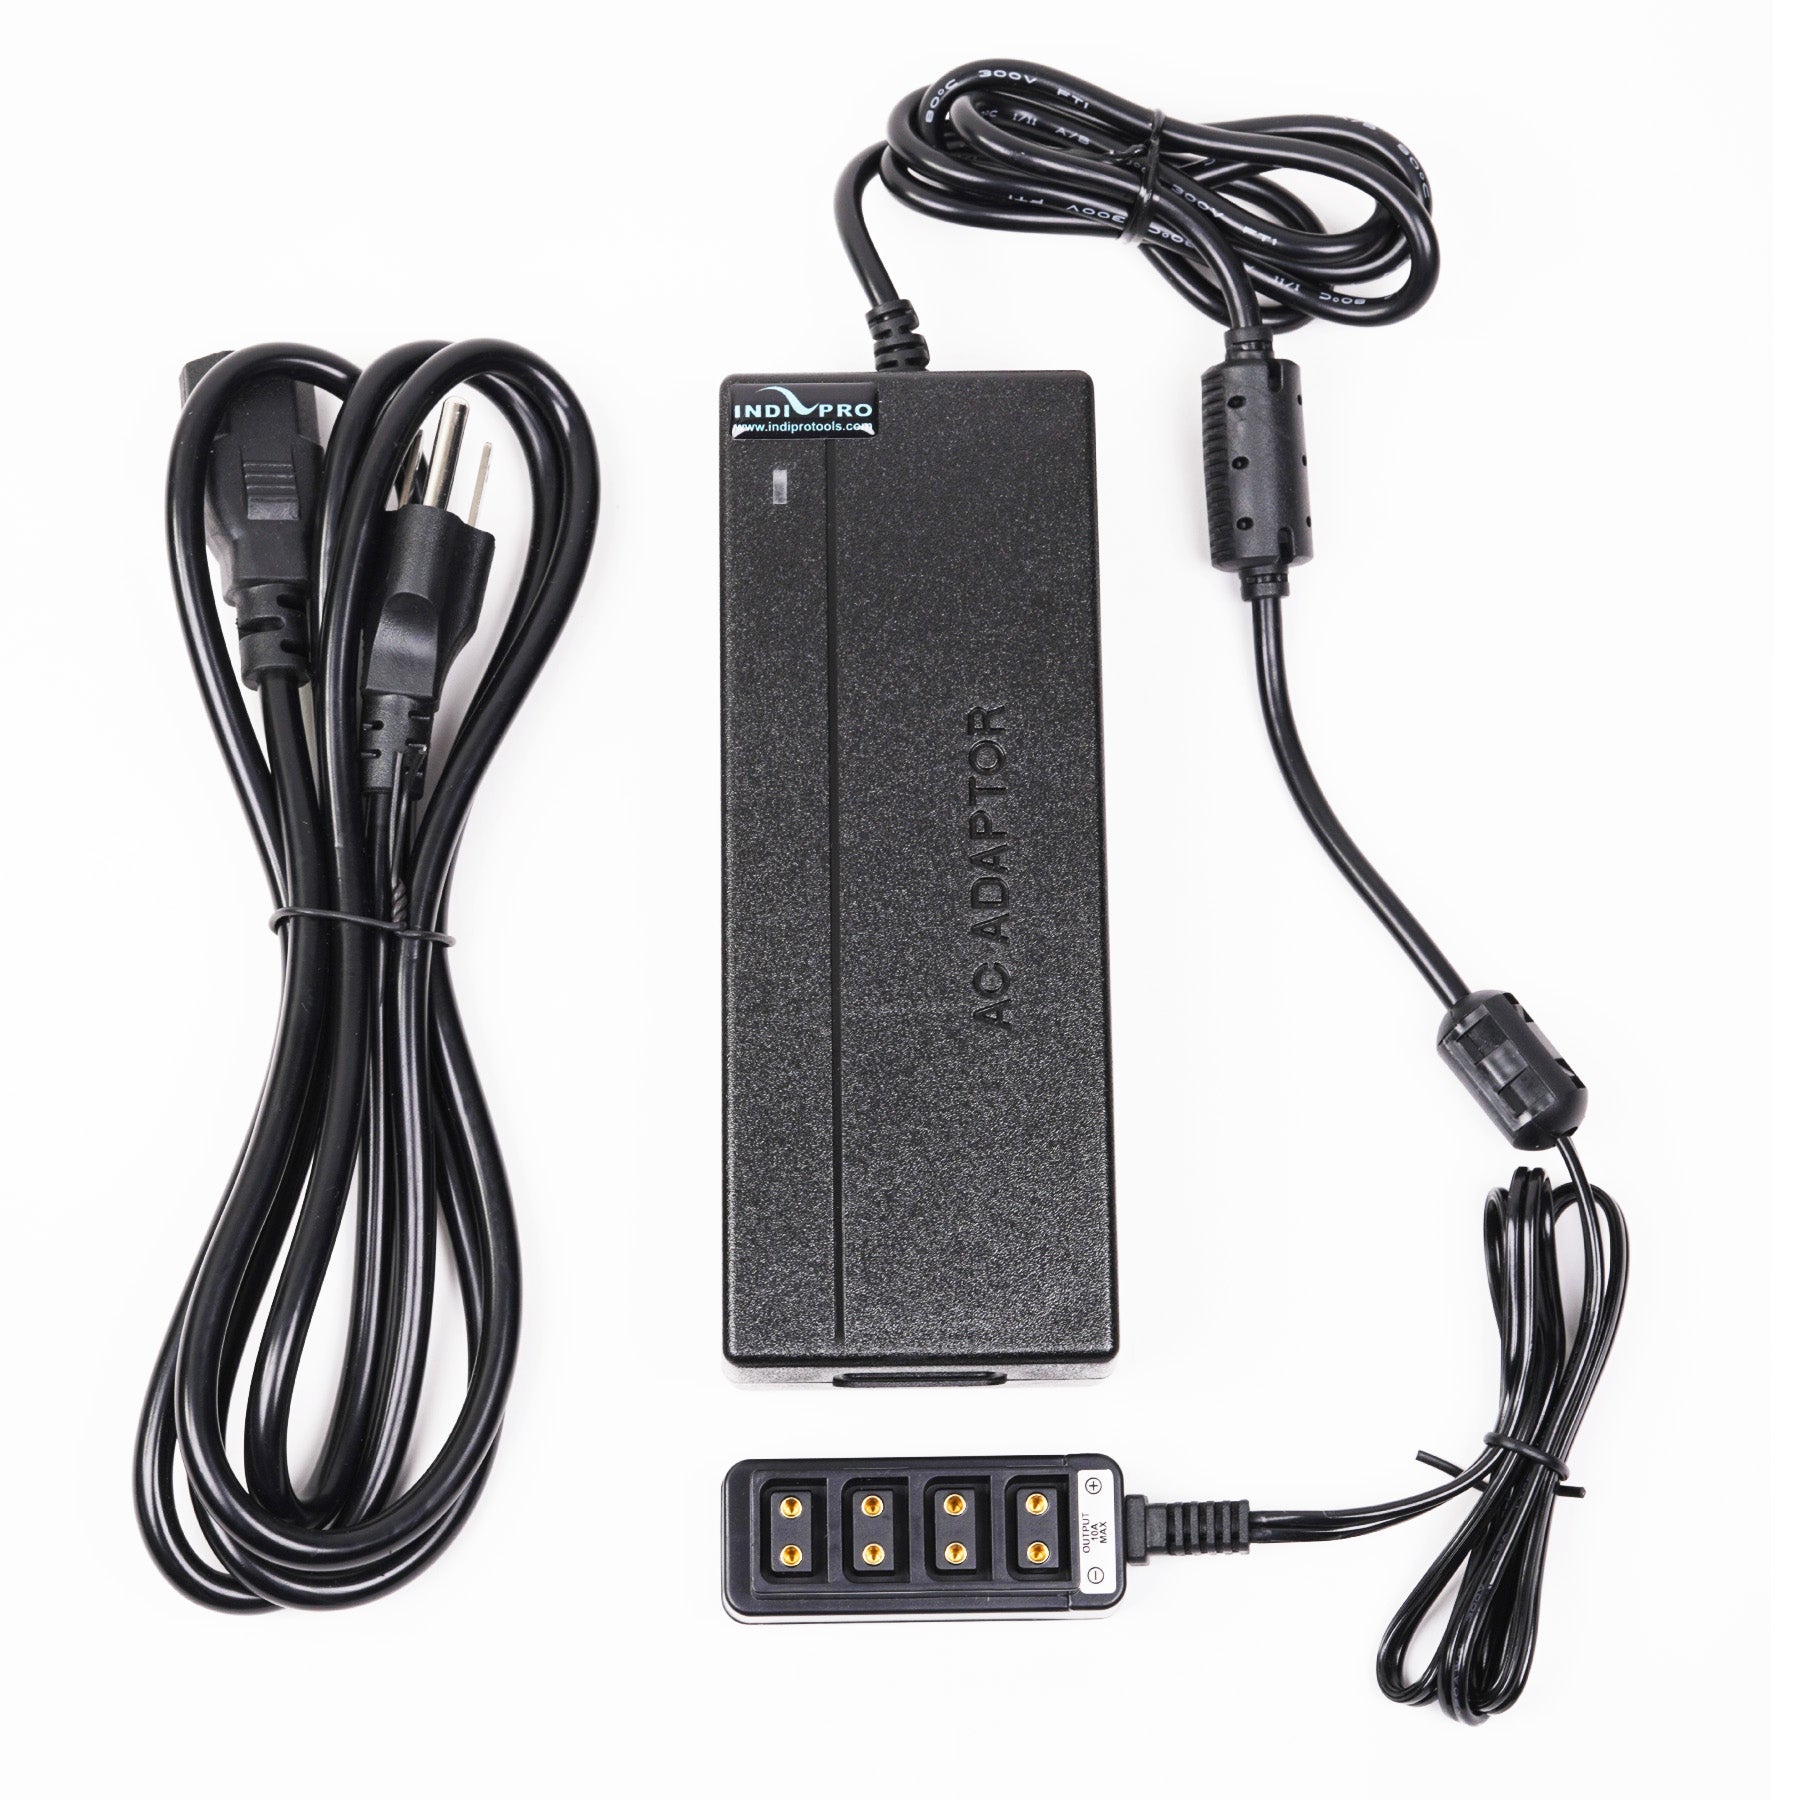 15V, 20A A/C Power Supply to 4-Way D-Tap Splitter (10')